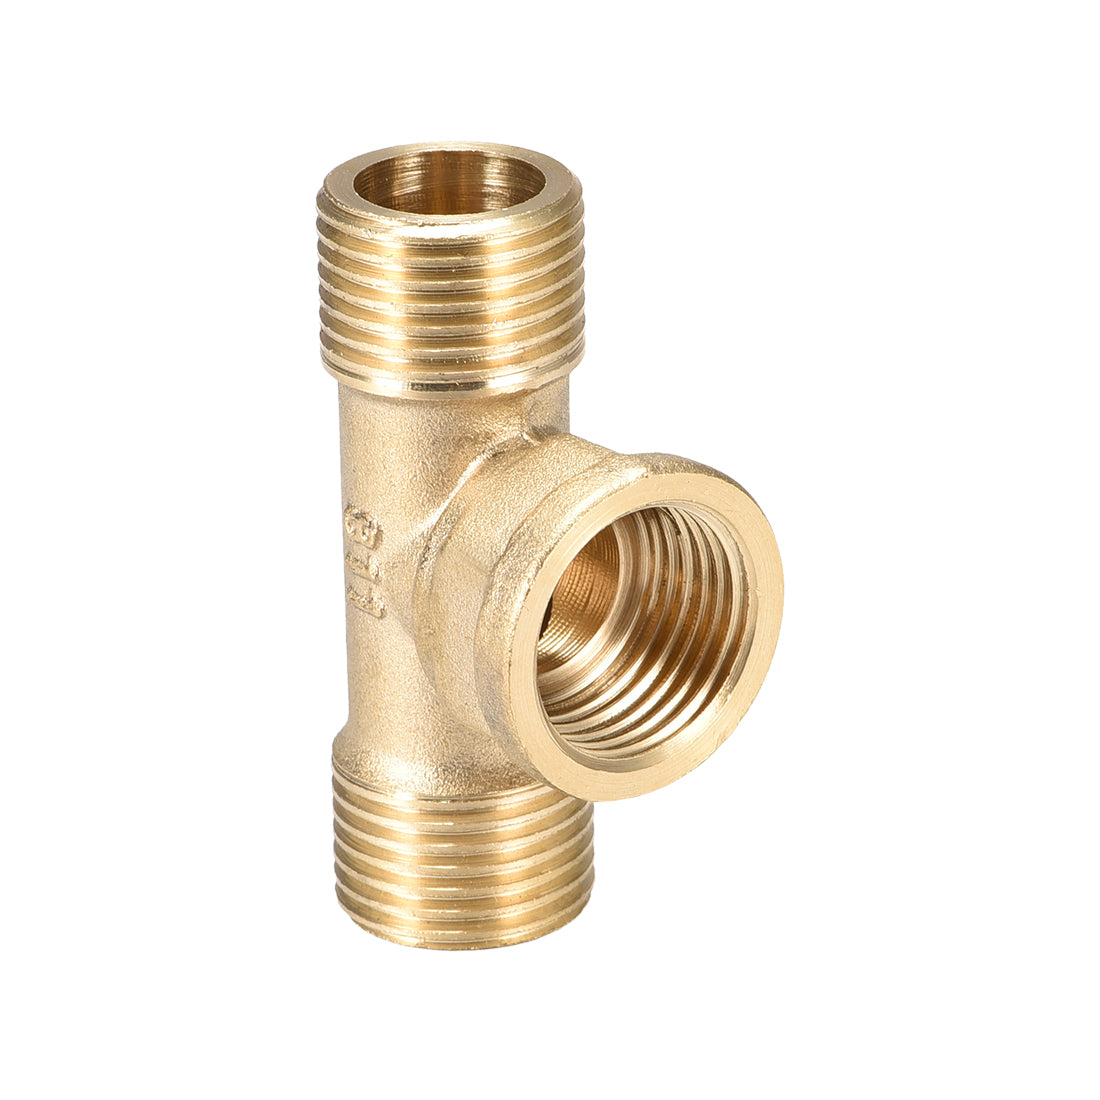 uxcell Uxcell Brass Tee Pipe Fitting G1/2 Male x G1/2  Female x G1/2 Male T Shaped Connector Coupler 3pcs